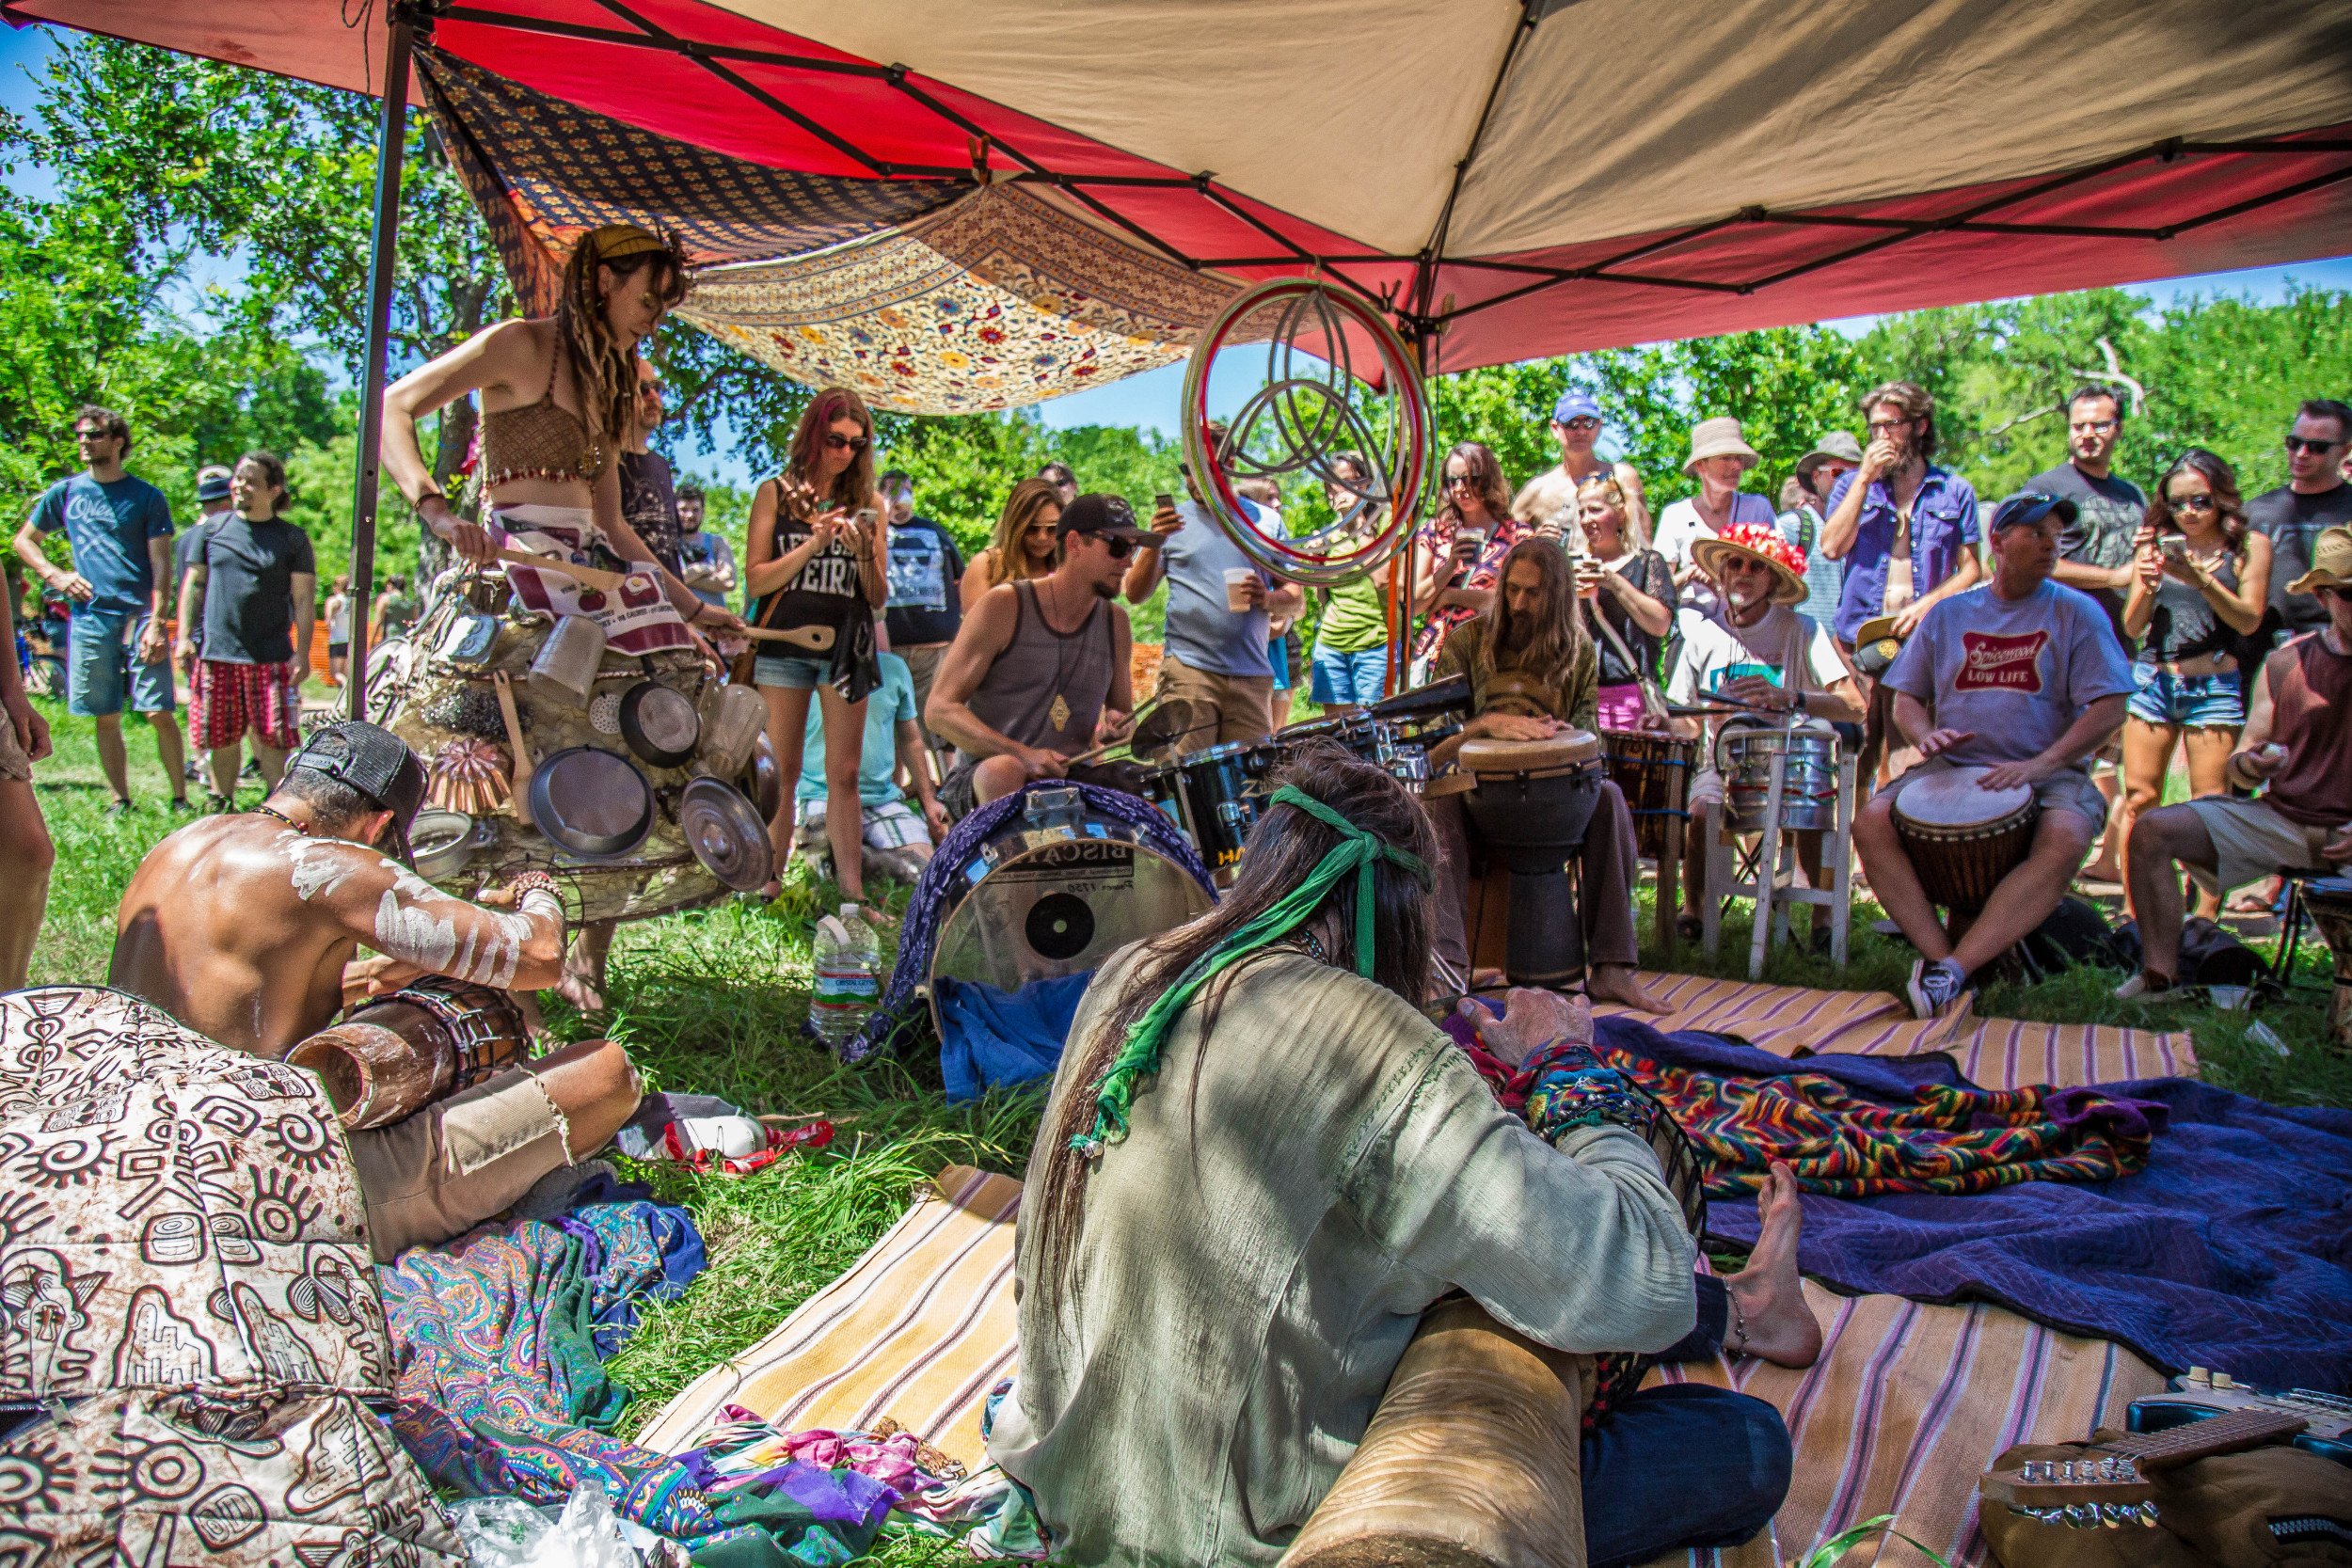 Heart of the Eeyore's Festival Drum Circle - Photo: Will Taylor  - LostinAustin.org6street.com